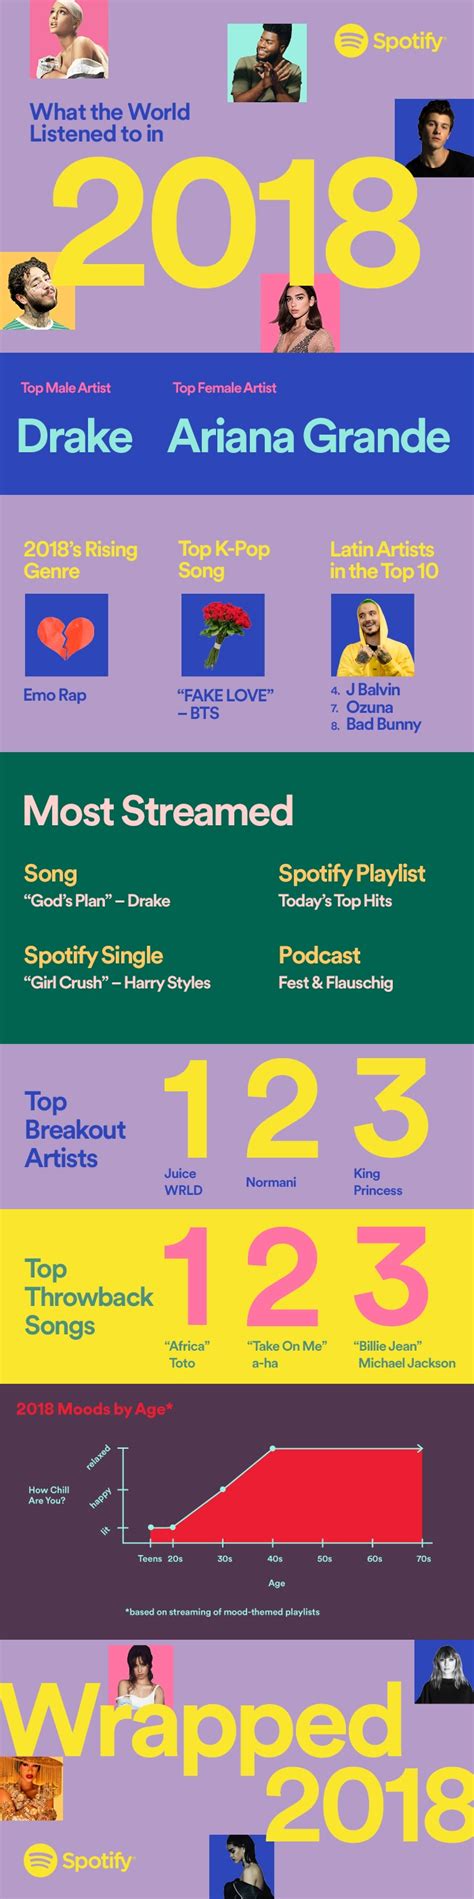 spotify usage and revenue statistics 2019 business of apps